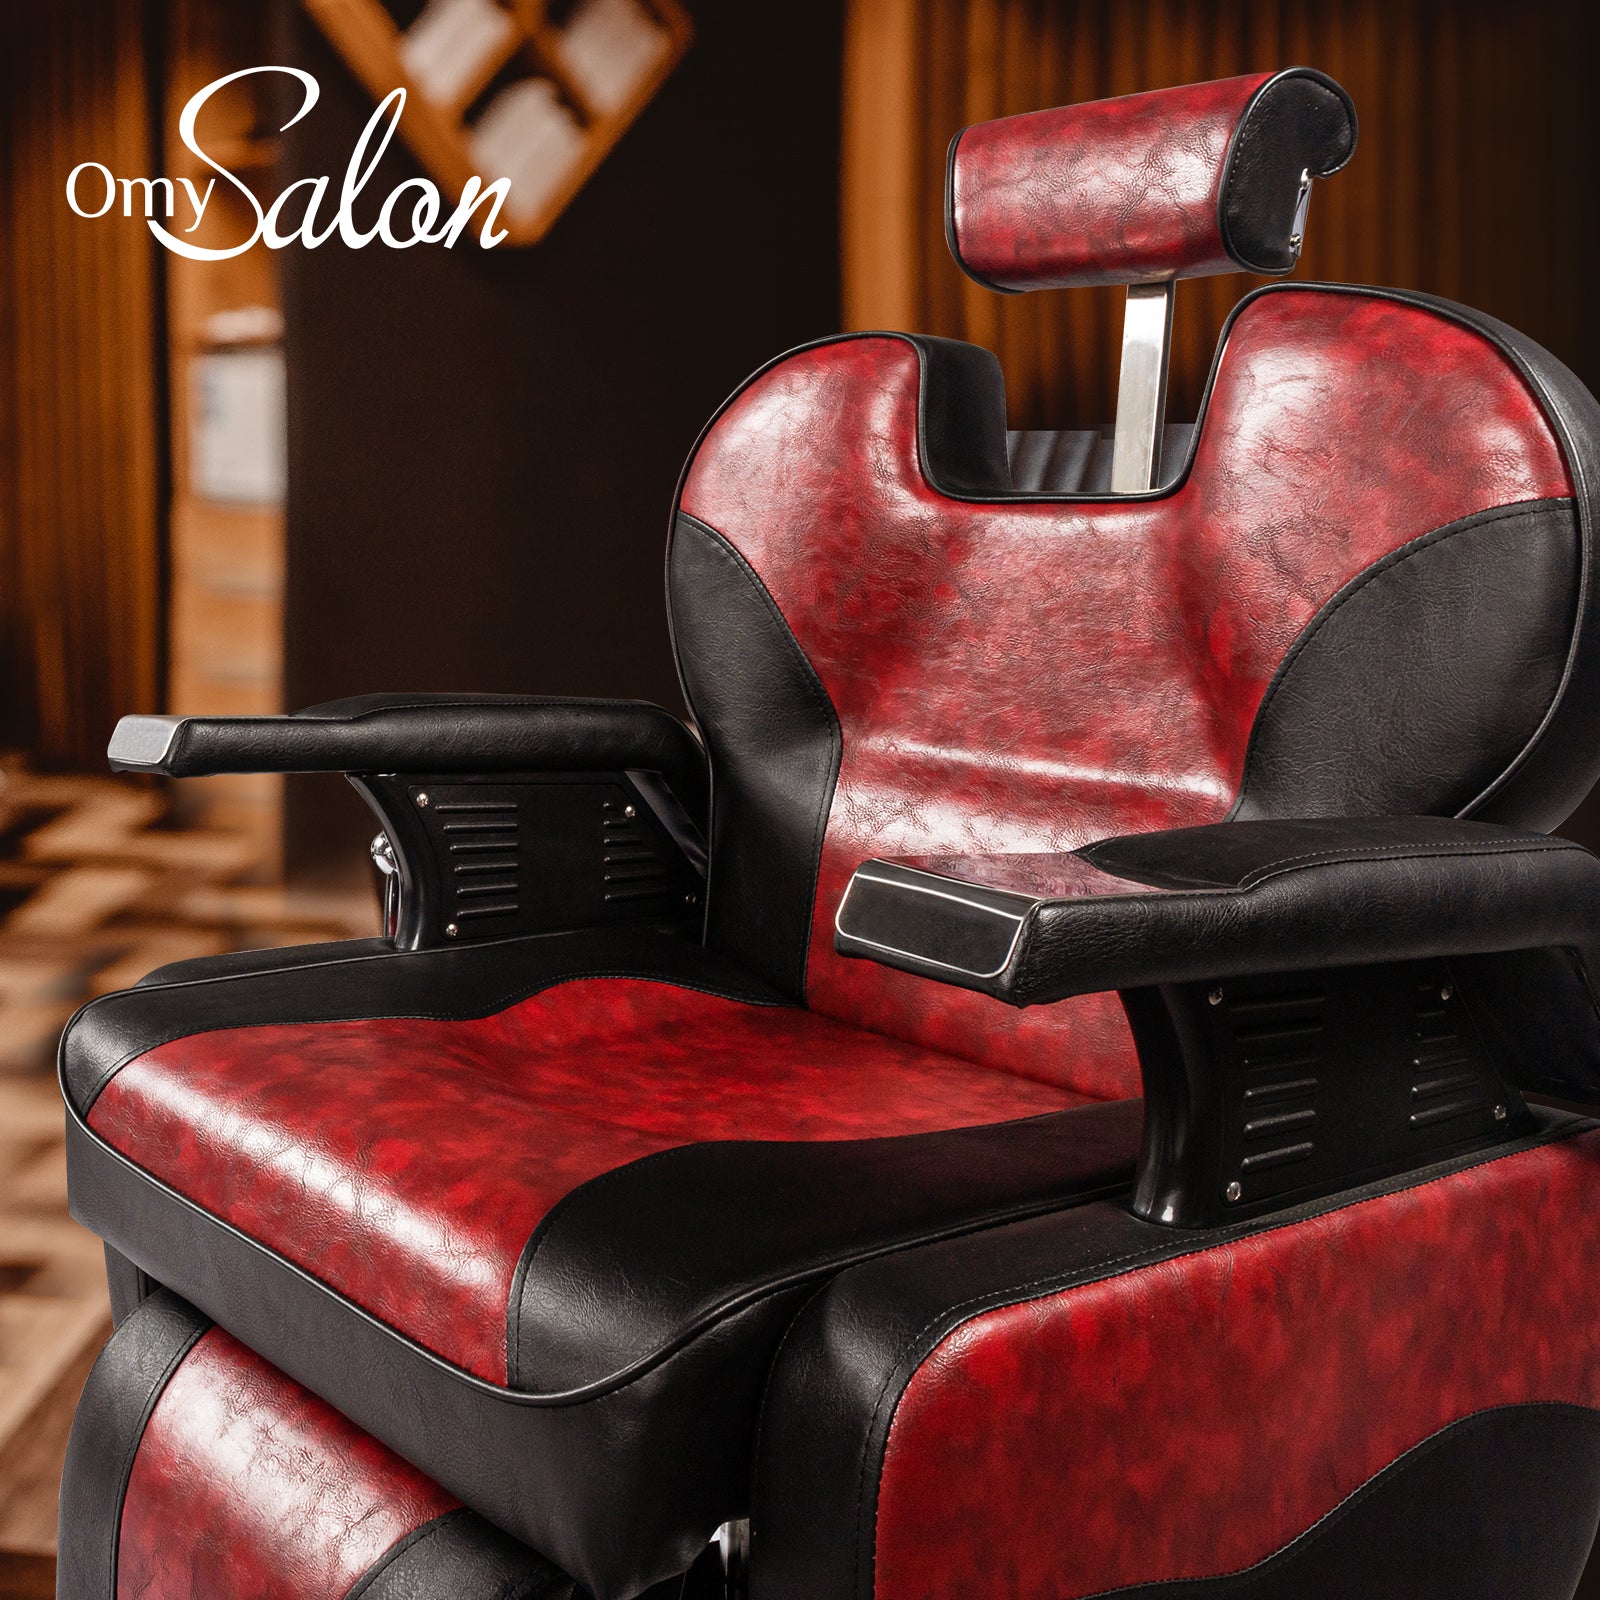 Barber Child Chair Booster Seats W/Leather Cushion